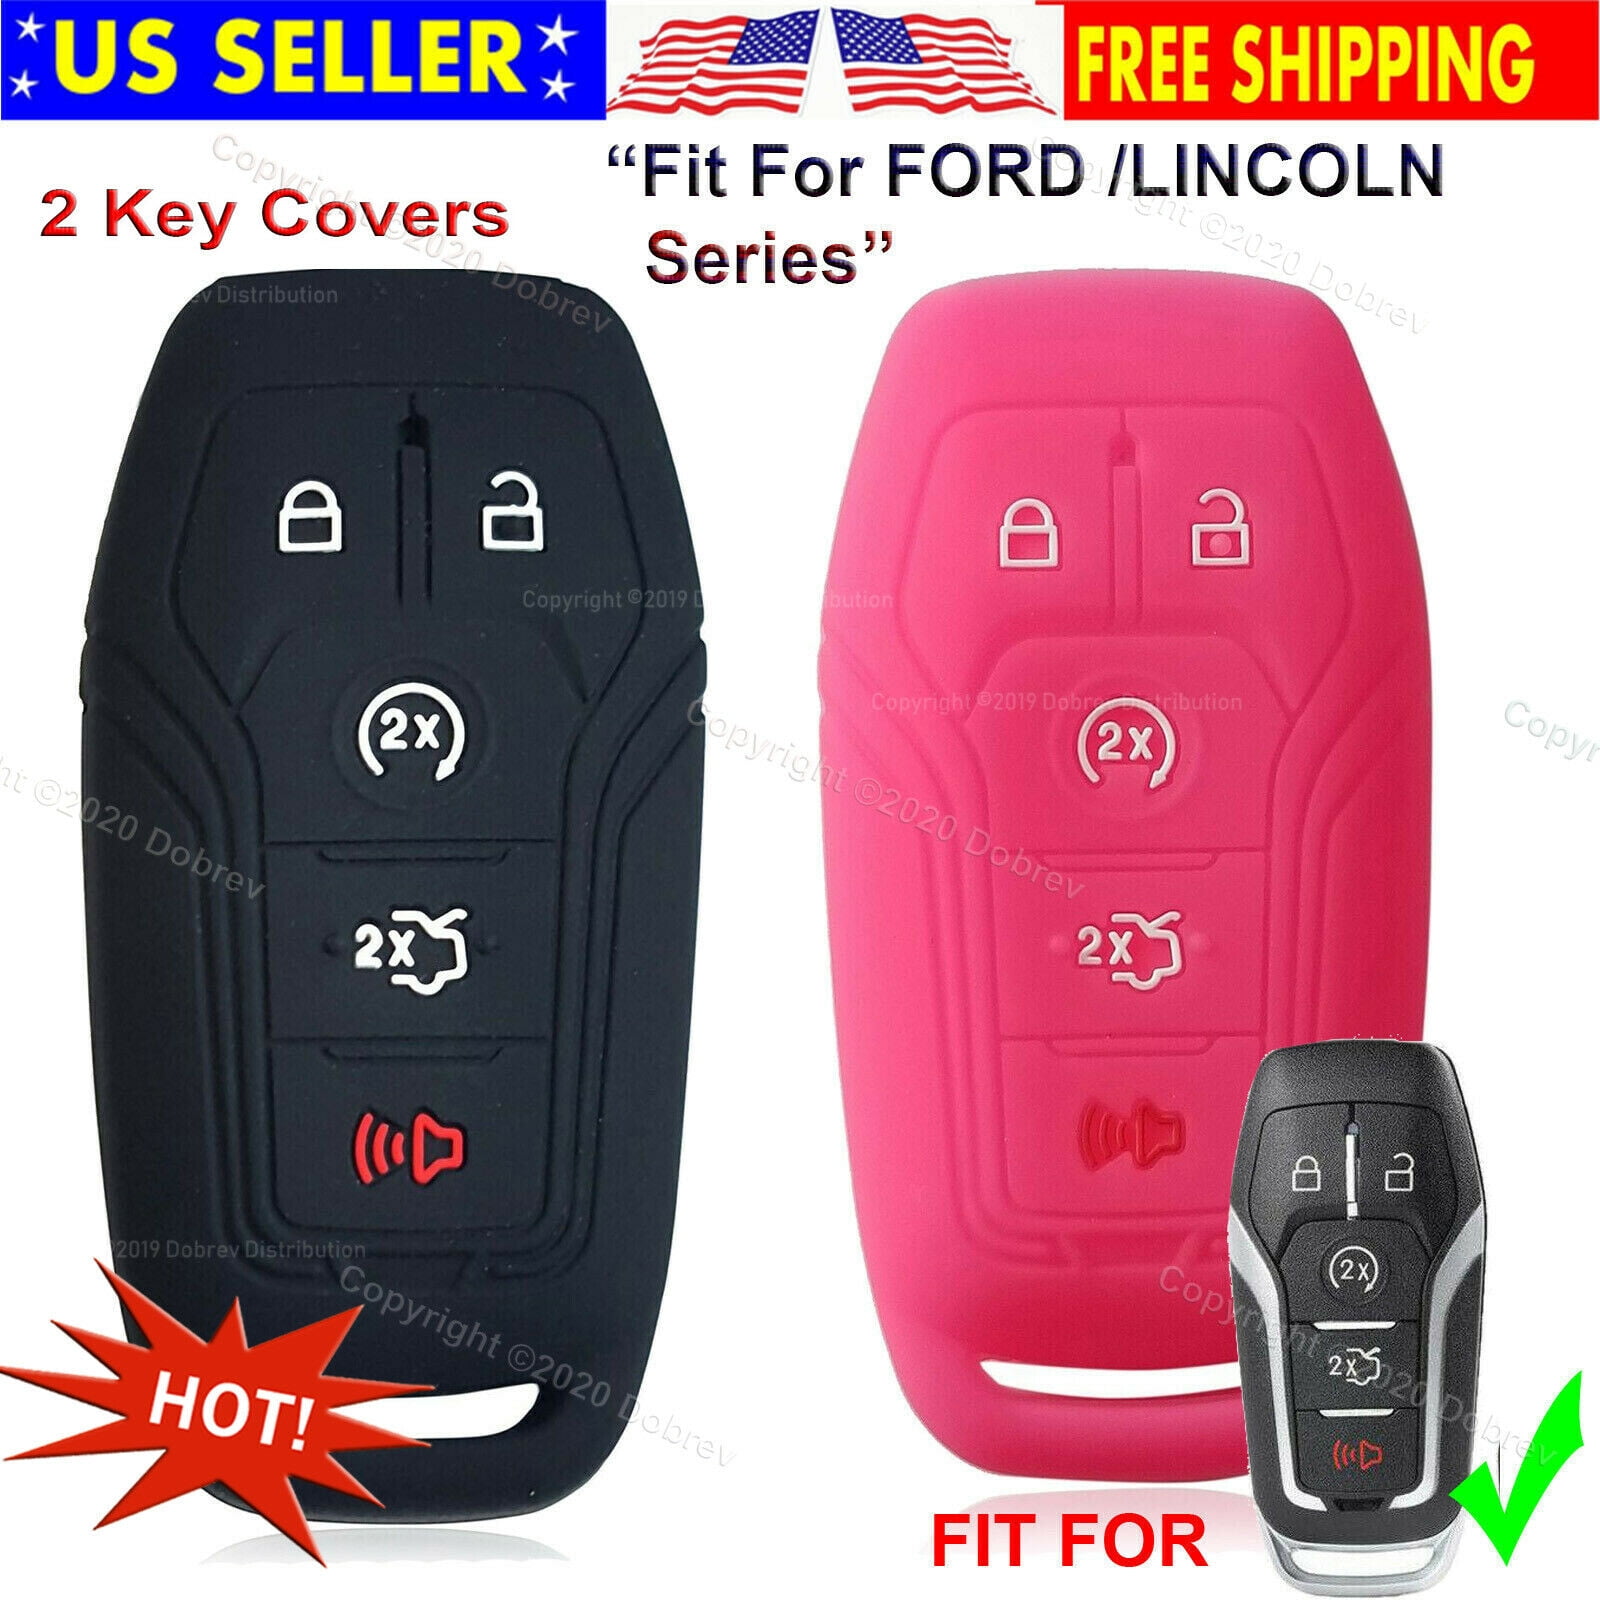 Black Silicone Fob Case Cover Smart Key Case Shell Key fit for Lincoln Ford 5B 